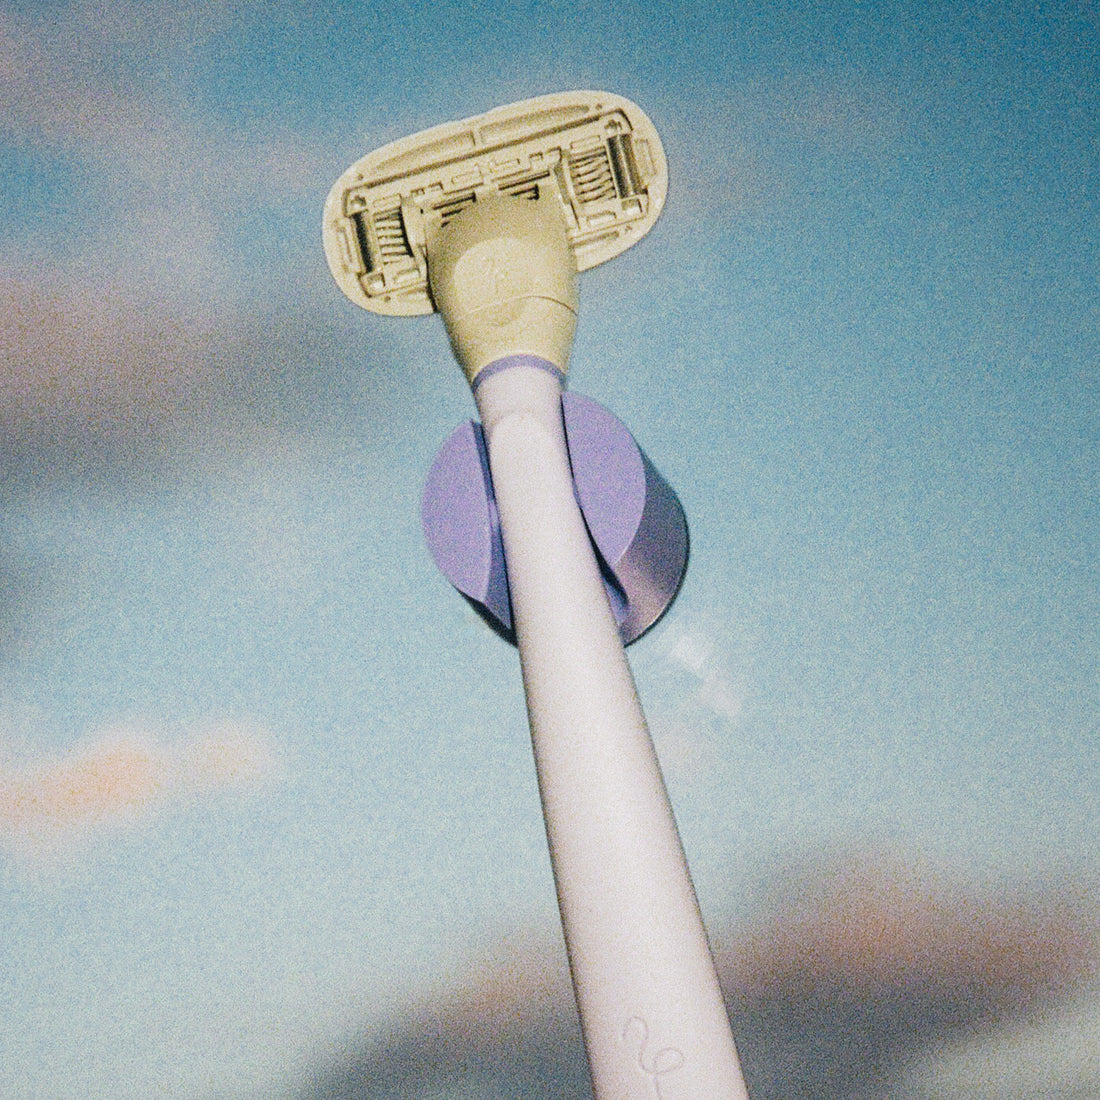 Flamingo Razor in the color Lilac in the matching shower holder with a gradient sky background